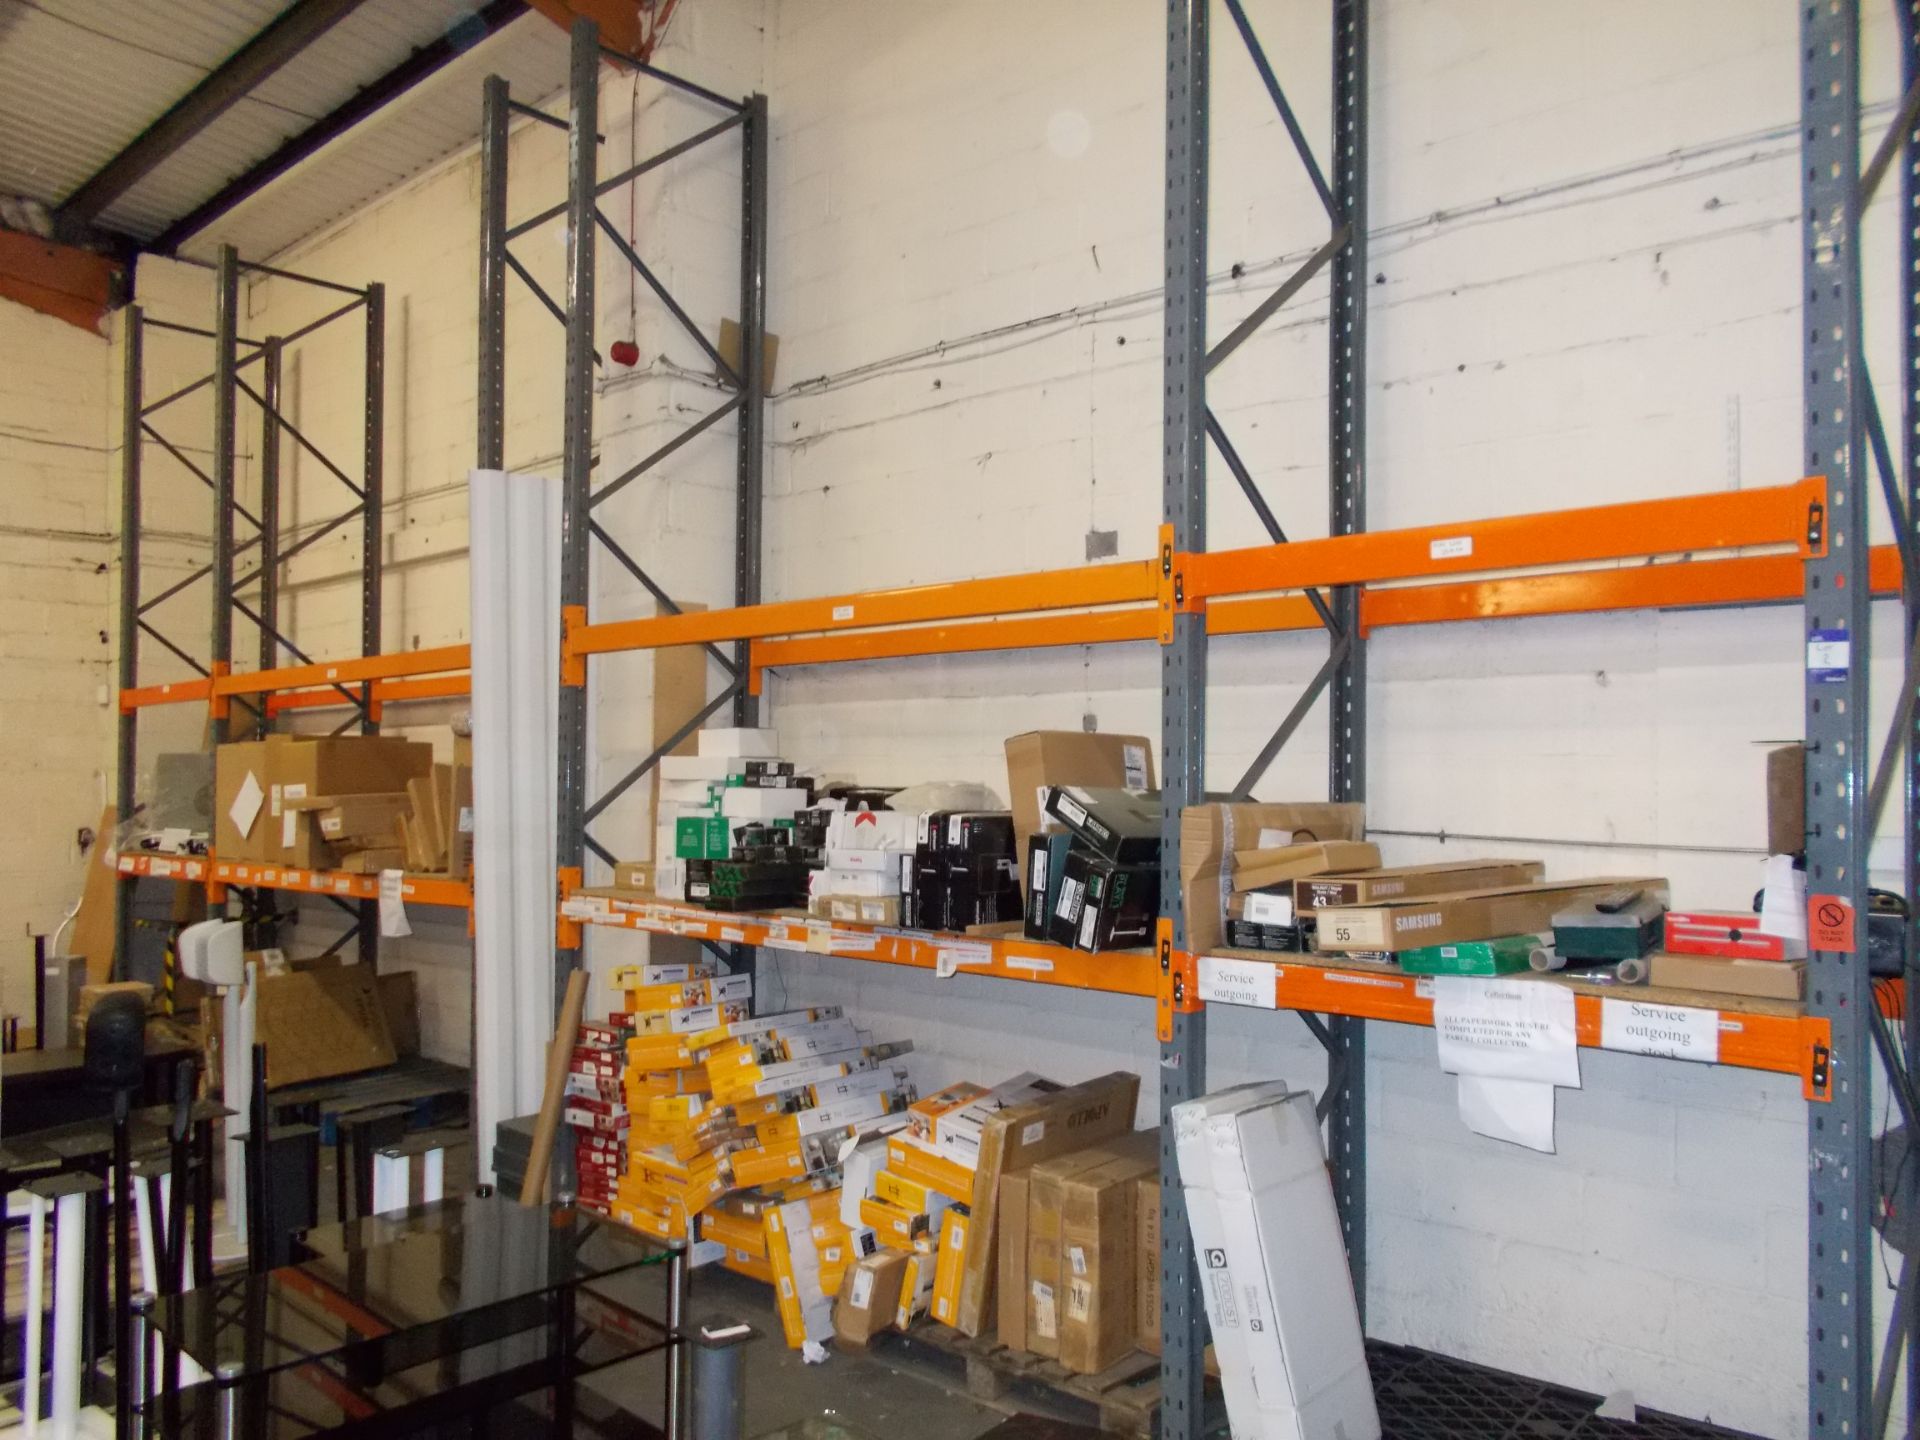 3 bays of heavy duty Boltless Racking (delayed collection – removal by arrangement with the